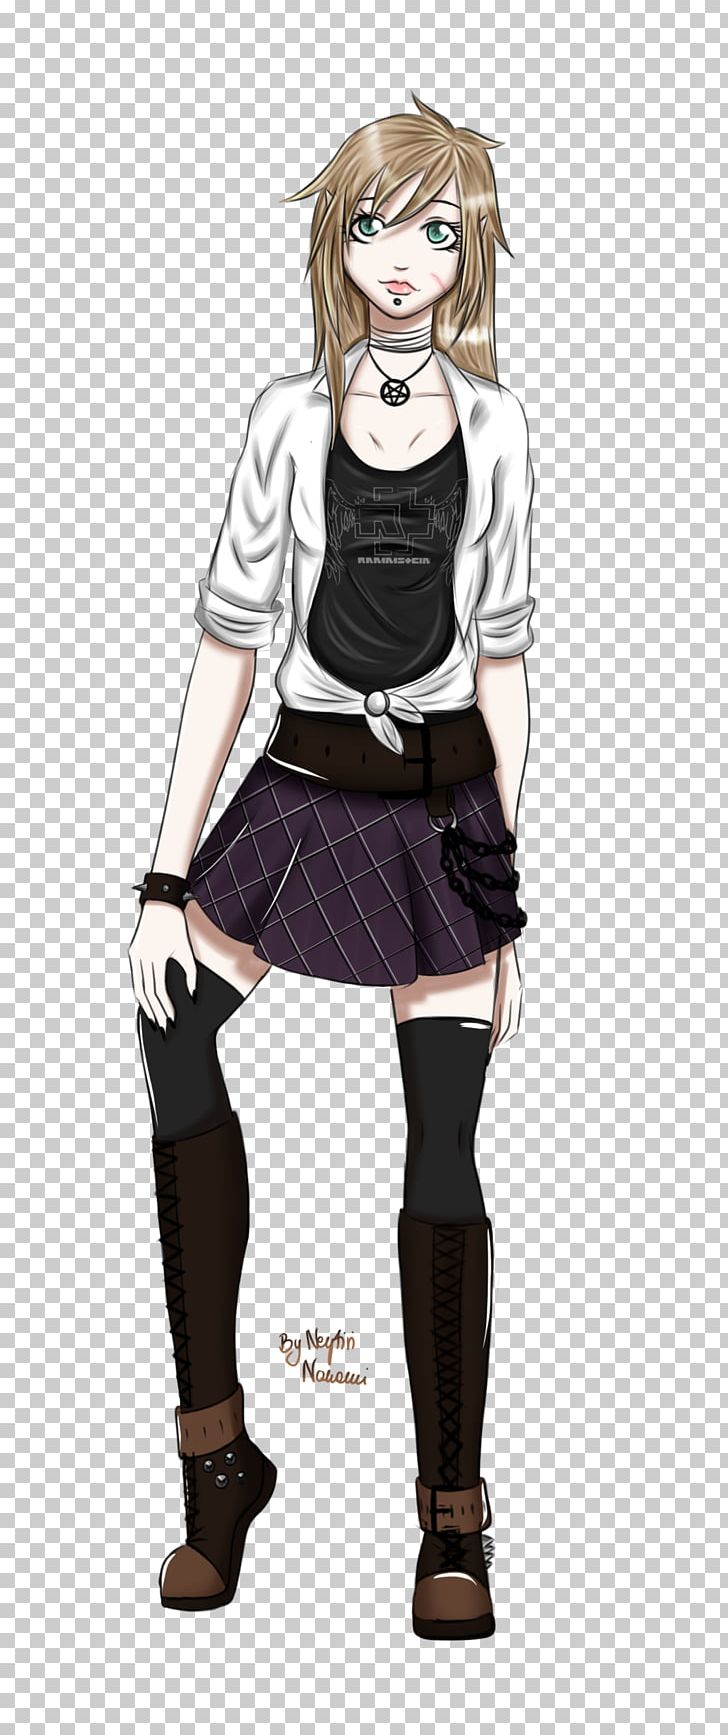 Costume School Uniform Tights Leggings PNG, Clipart, Anime, Brown Hair, Character, Clothing, Costume Free PNG Download